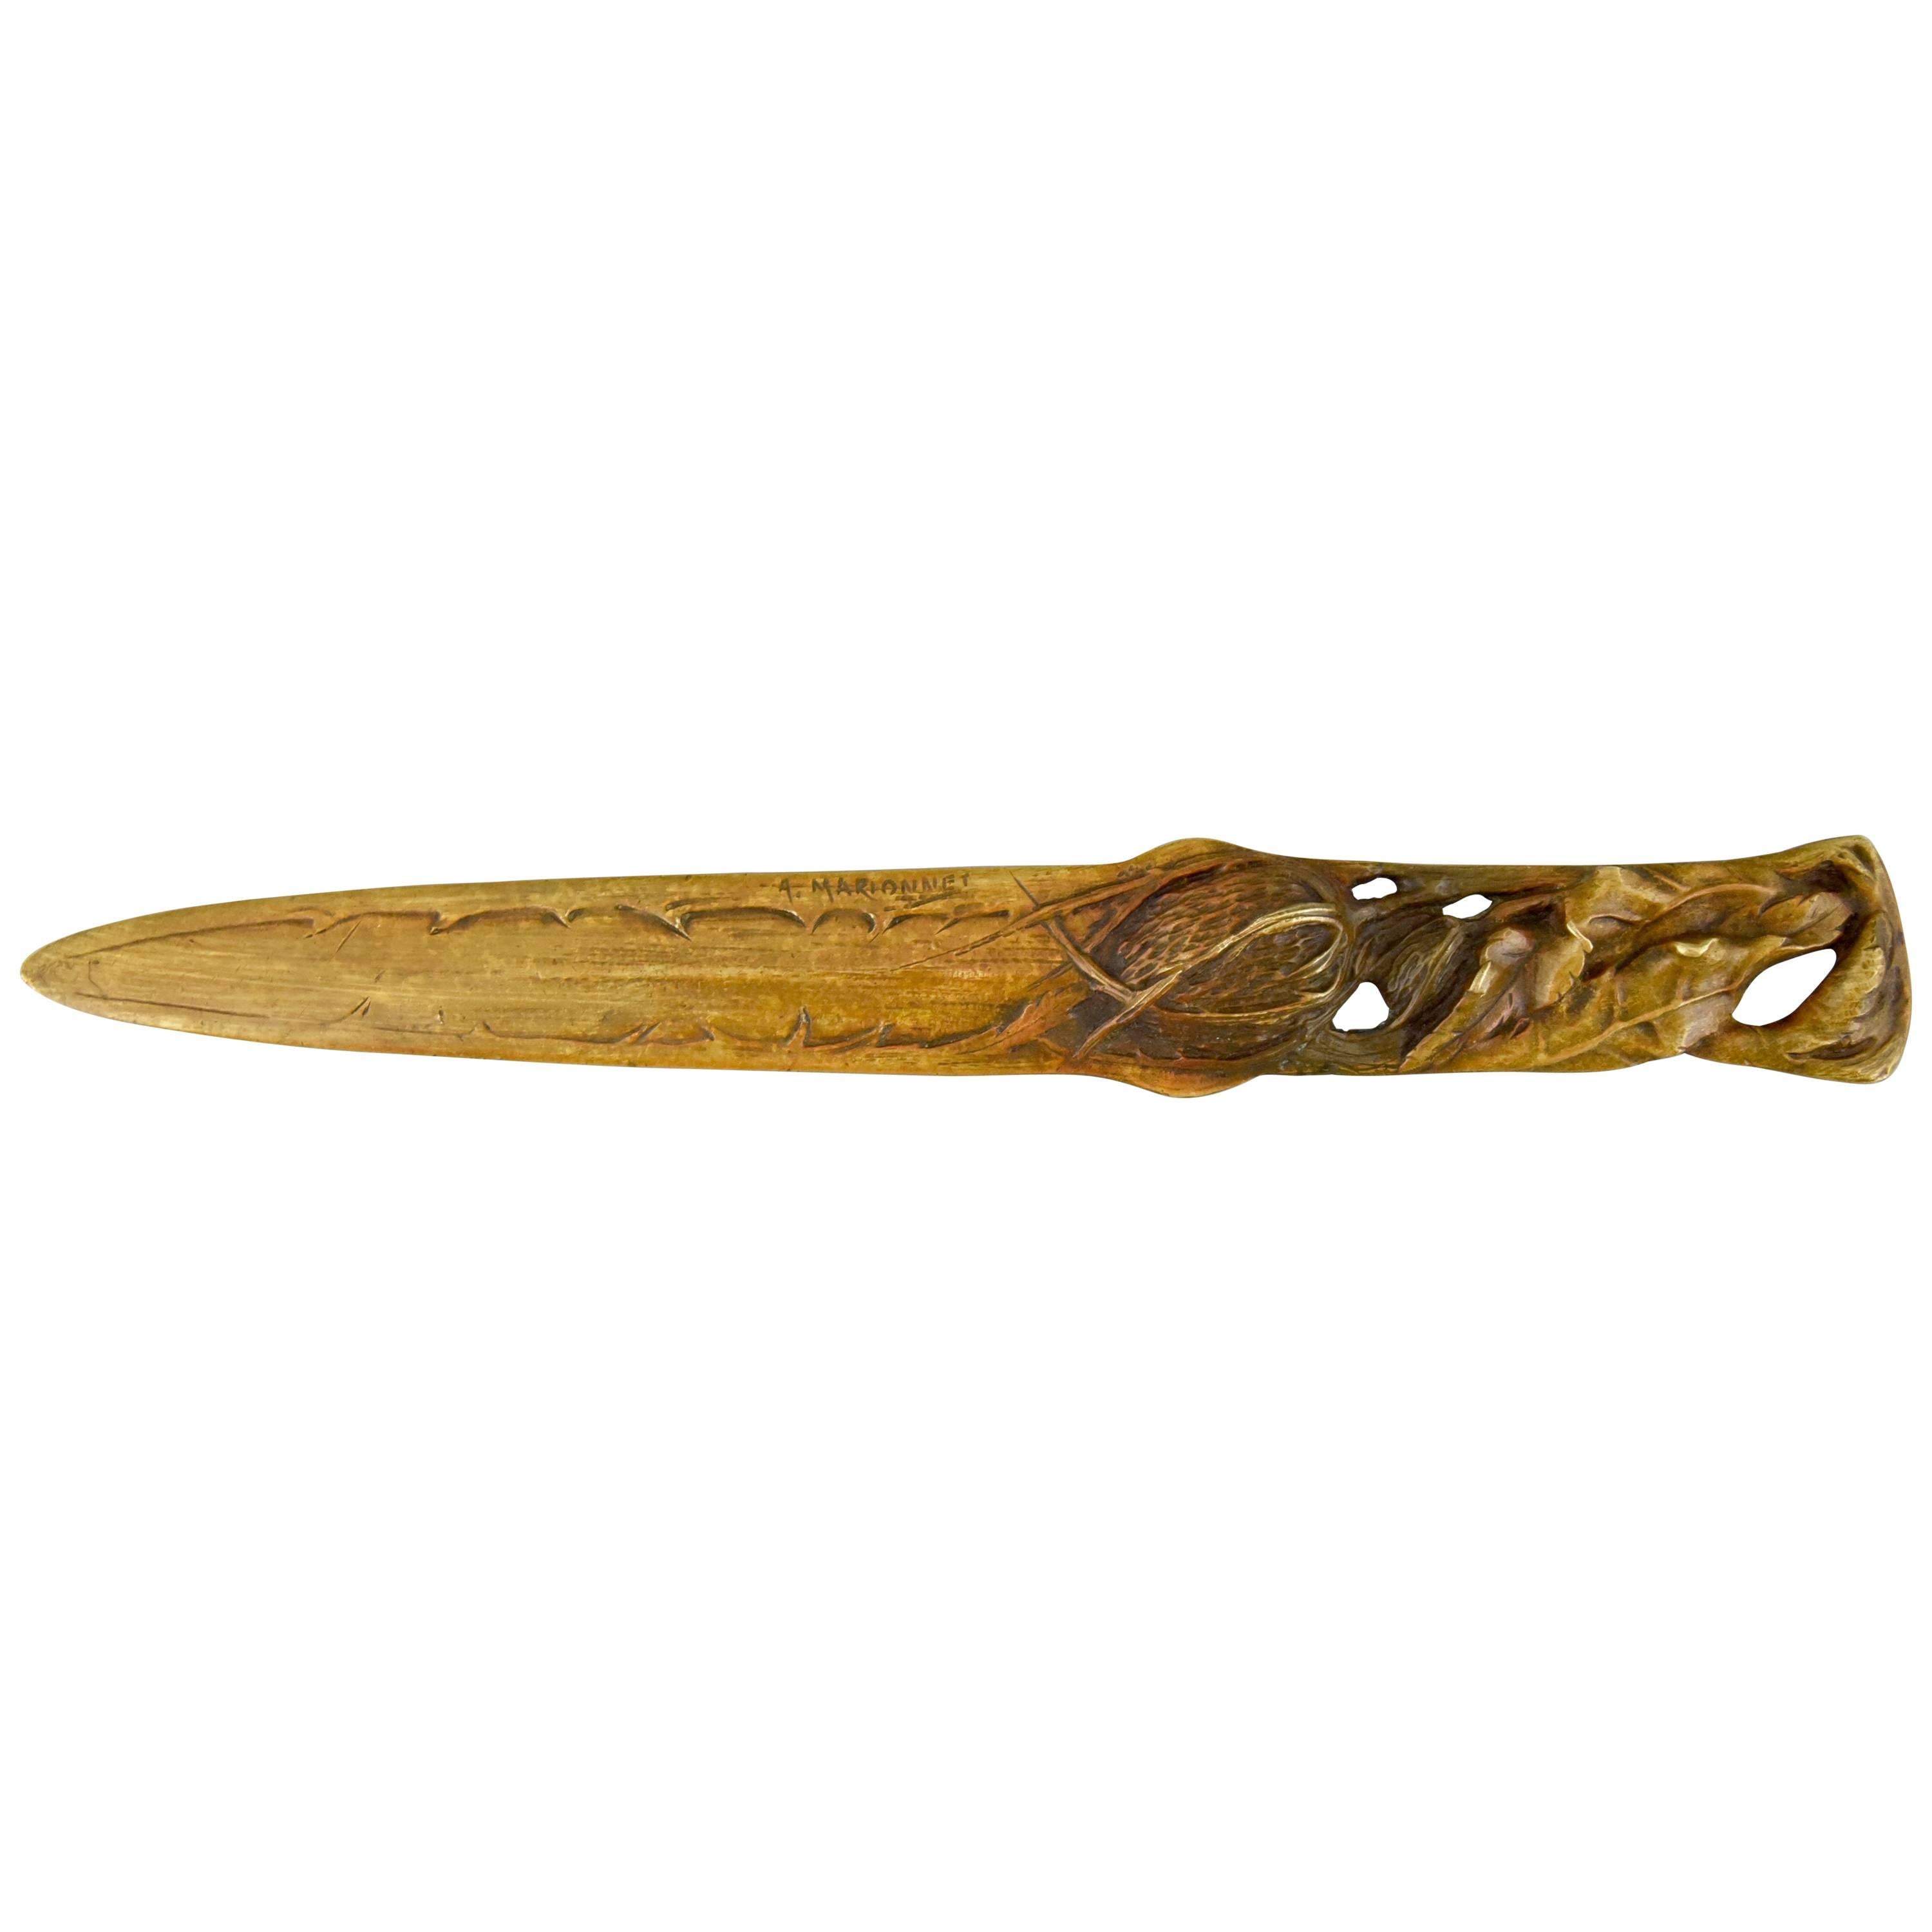 French Art Nouveau Bronze Letteropener or Bookmark by A. Marionnet, 1900